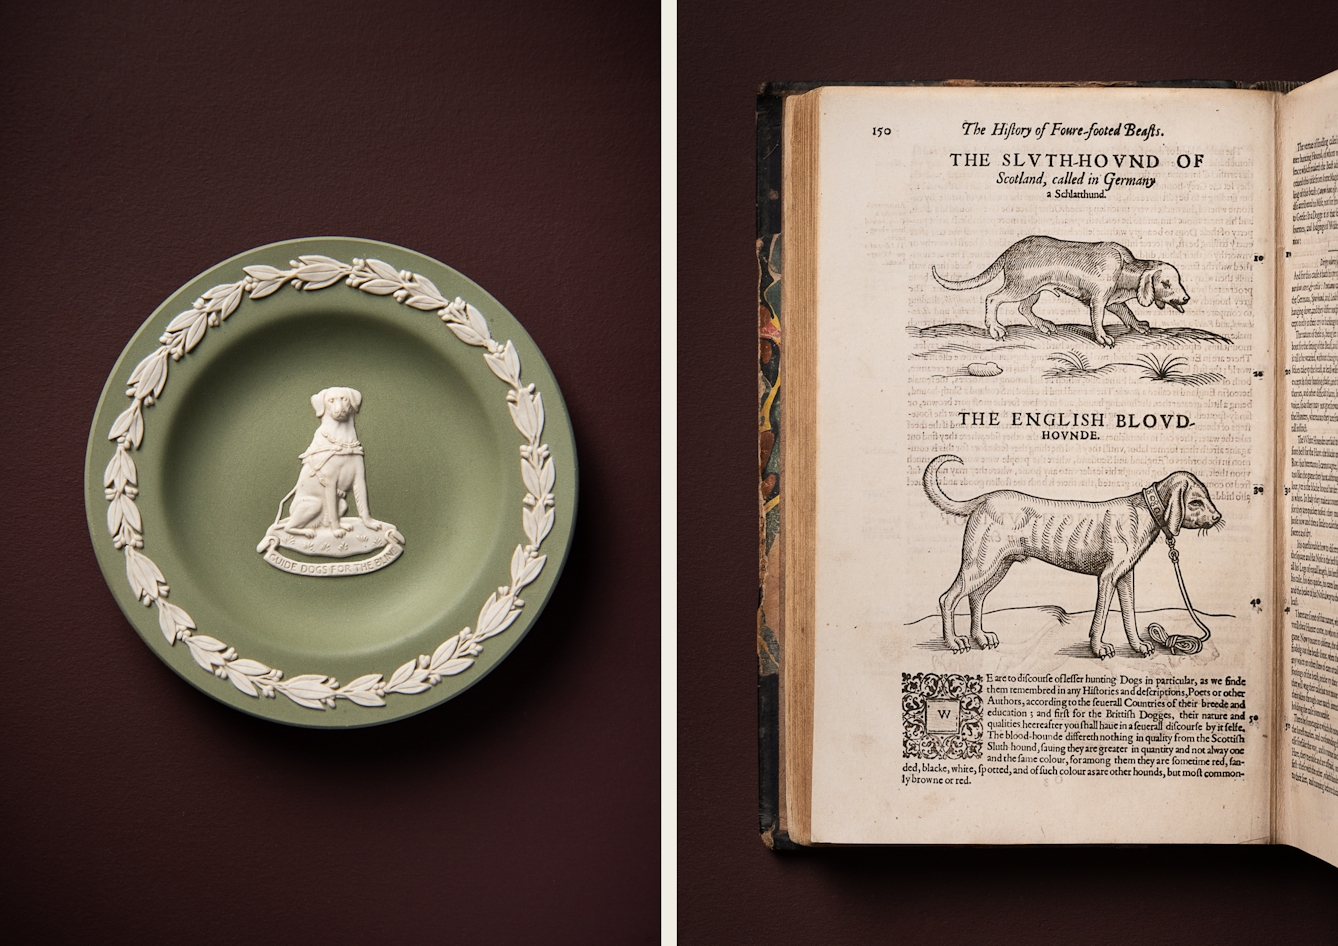 A photographic diptych. The image on the left shows a modern decorative plate in a muted green in the middle of which there is an image of a Labrador guide dog wearing a harness underneath which is the text ‘Guide Dogs For The Blind’ on a scroll. Both feature in white relief, as does a floral design around the edge of the plate. The image on the right shows the left hand page of a medieval book featuring two illustrations of bloodhounds in a black outline and a paragraph of text below. The items appear on a plain brown background.